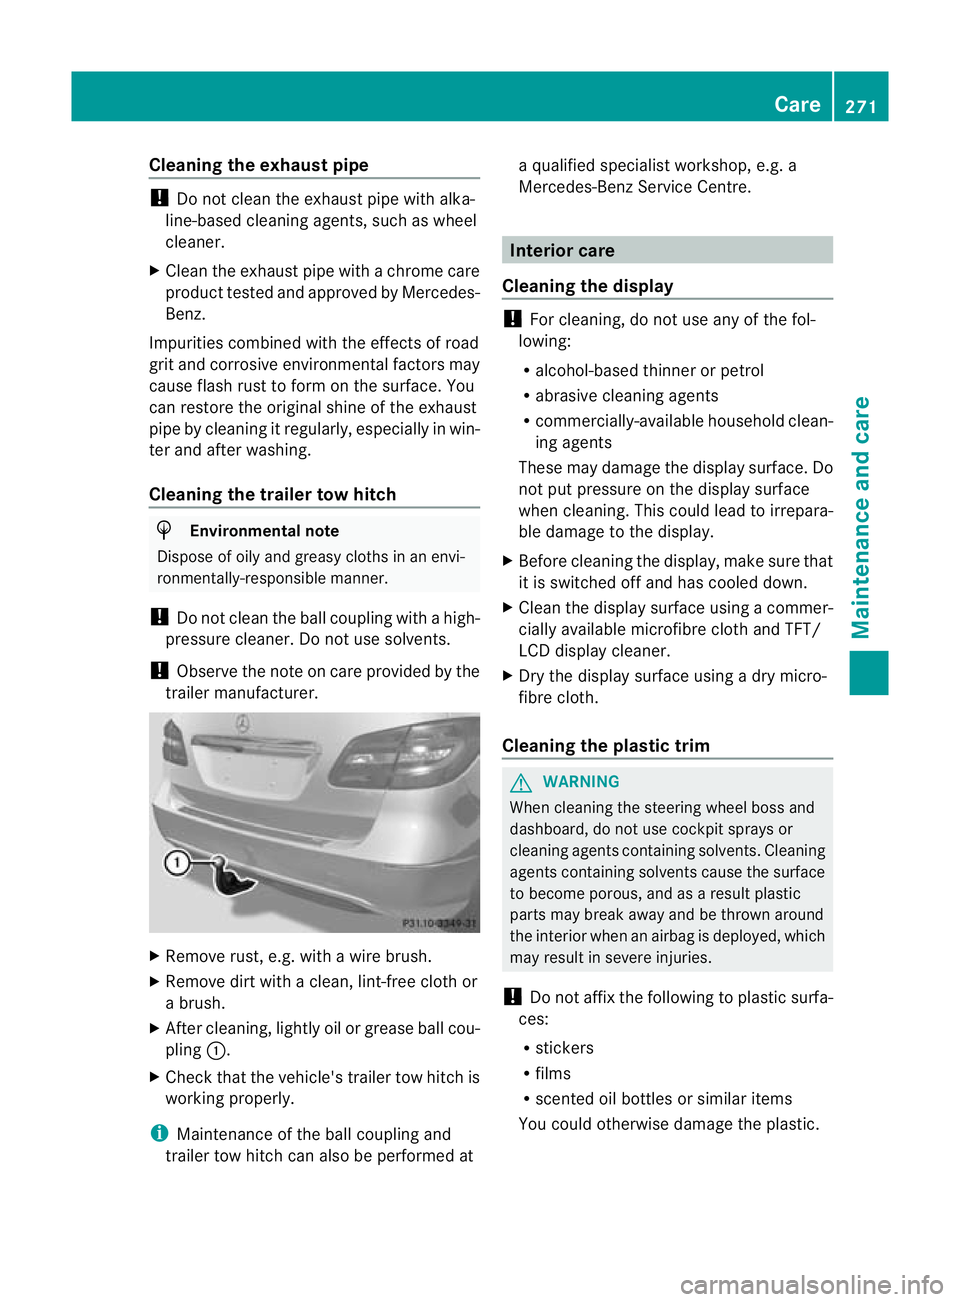 MERCEDES-BENZ B-CLASS HATCHBACK 2011 Service Manual Cleaning the exhaust pipe
!
Do no tclean the exhaust pipe with alka-
line-based cleaning agents, such as wheel
cleaner.
X Clean the exhaust pipe with a chrome care
produc ttested and approved by Merce